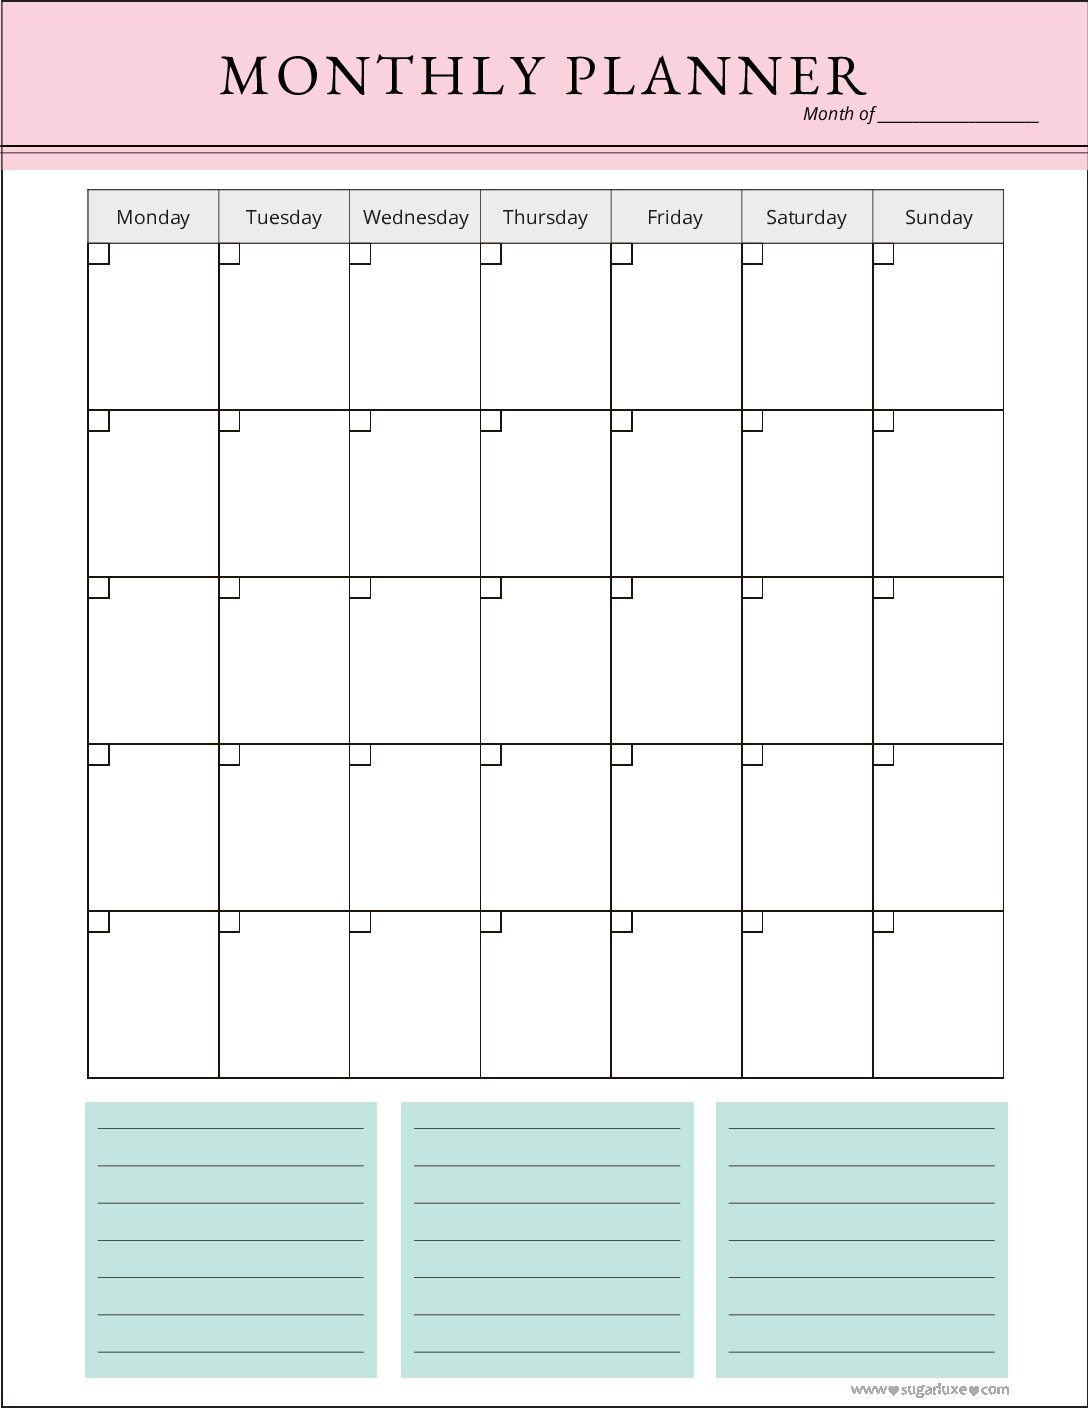 2022 Monthly Art Calendar + Daily Planner | SOLD OUT - Sugarluxe by ...